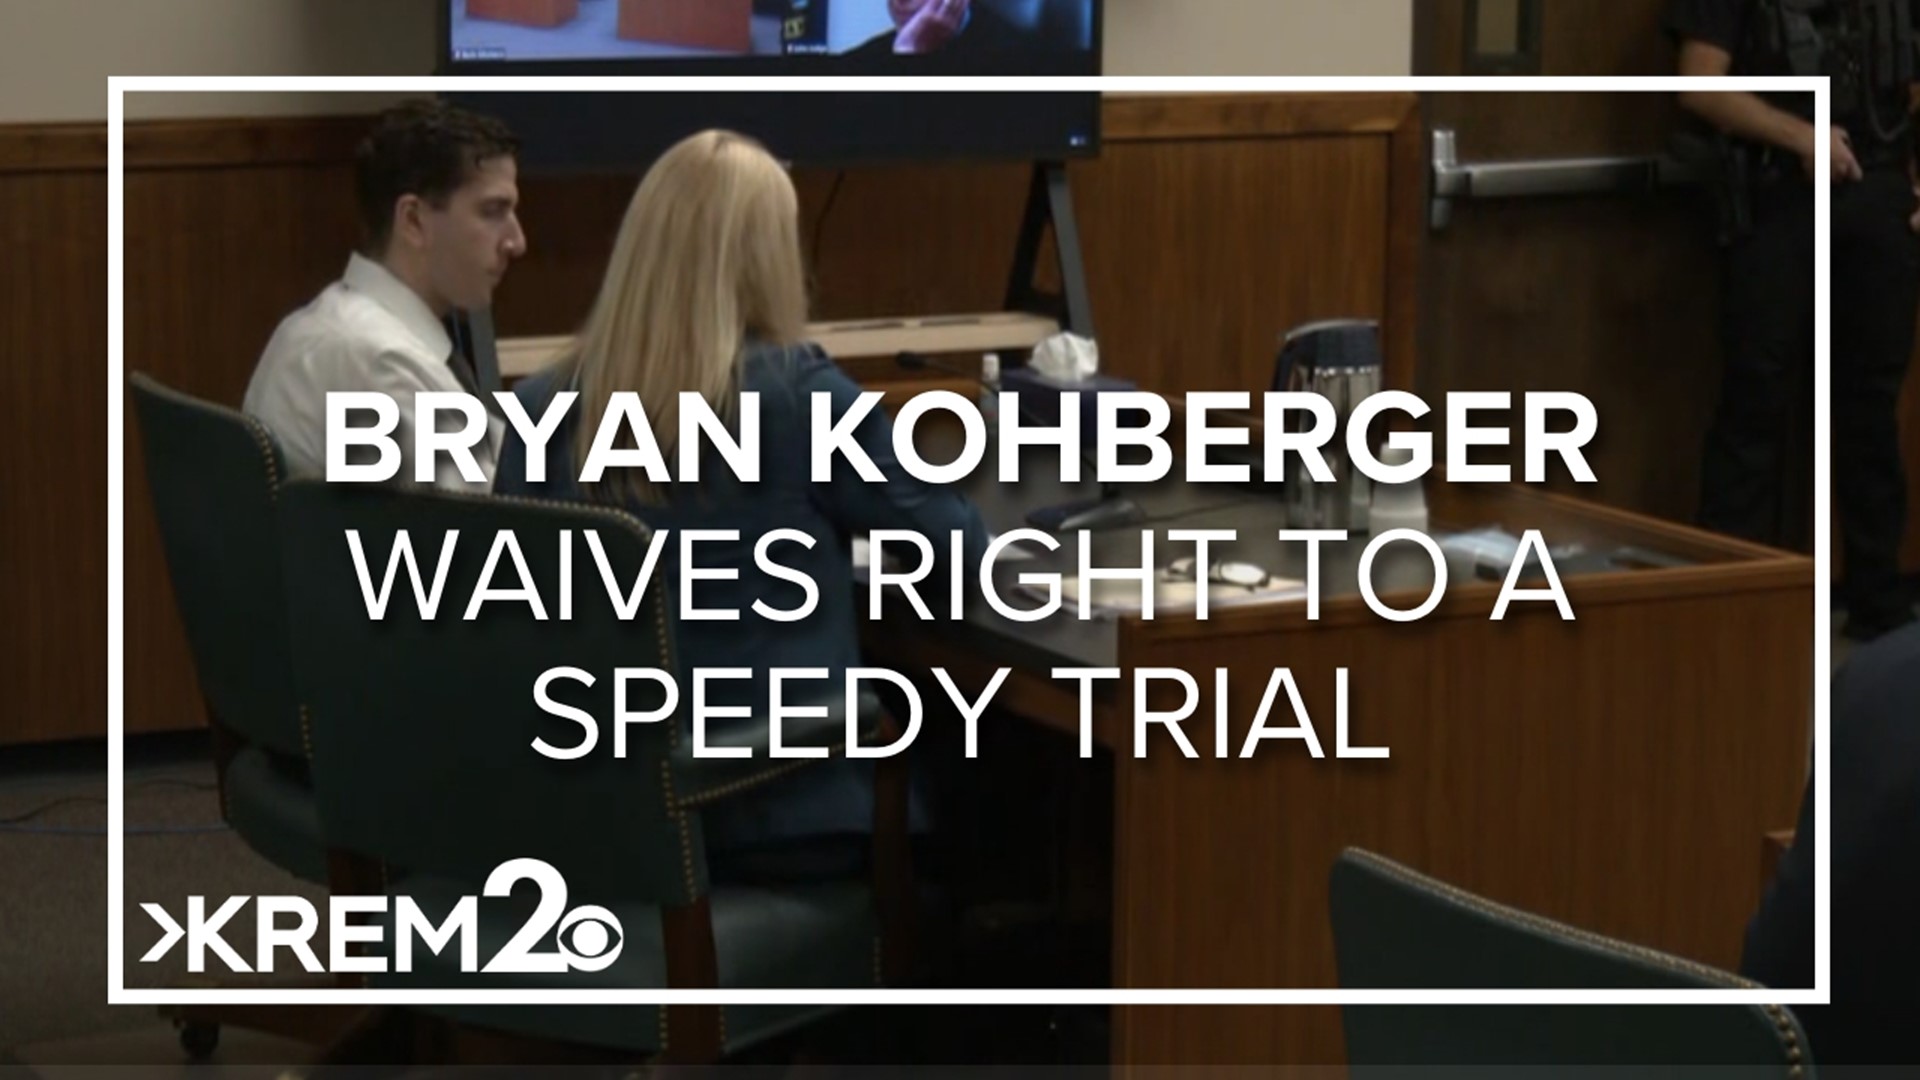 Because Kohberger plans to file several new motions, his trial will not begin on Oct. 2 as previously scheduled.